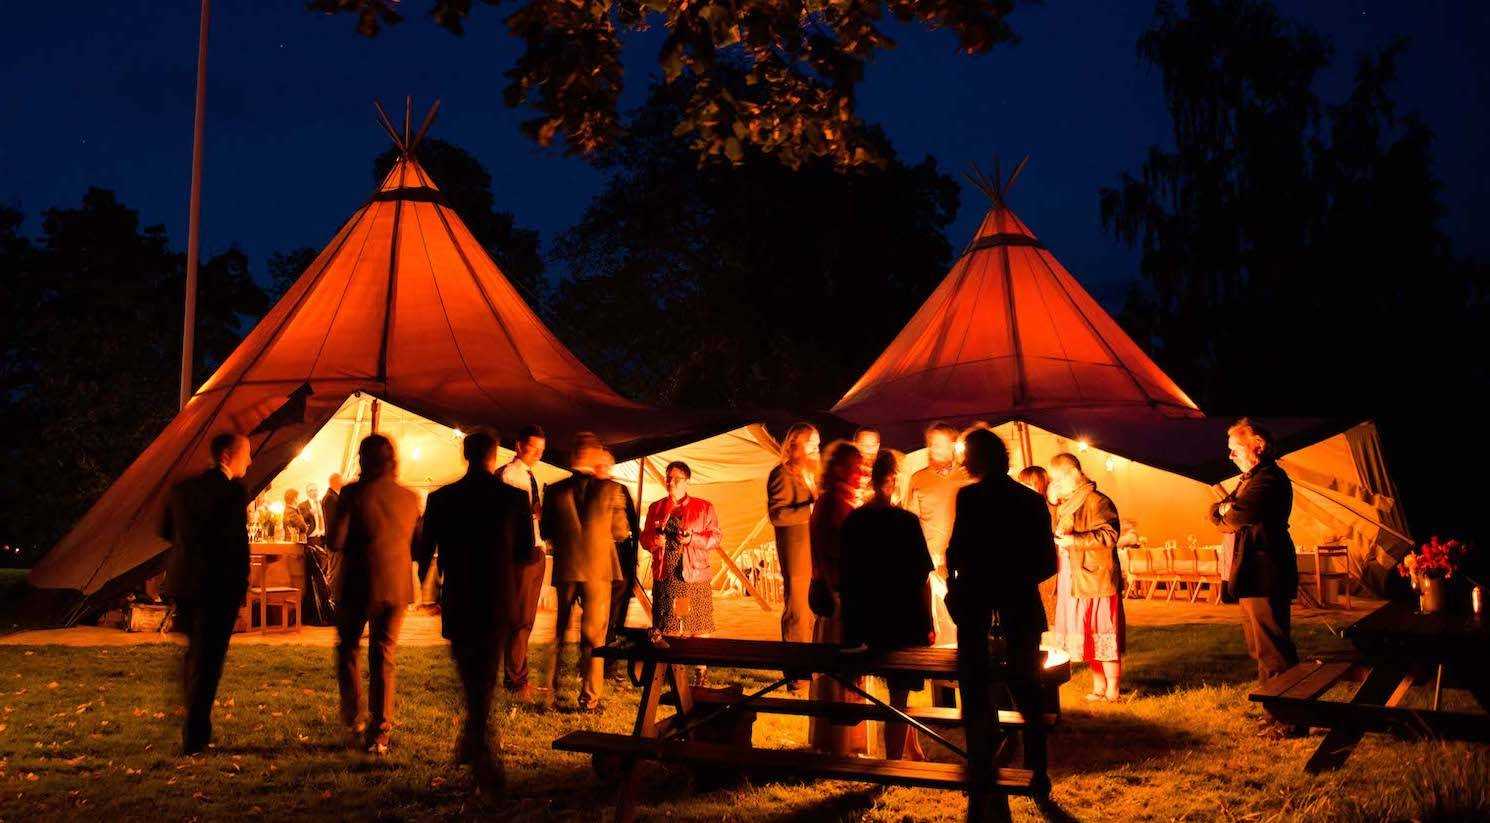 A tipi set up for a corporate event at night, illuminated by strings of lights and with elegant furniture inside. The tipi is located in a natural setting, surrounded by trees and greenery, and the starry night sky can be seen overhead.